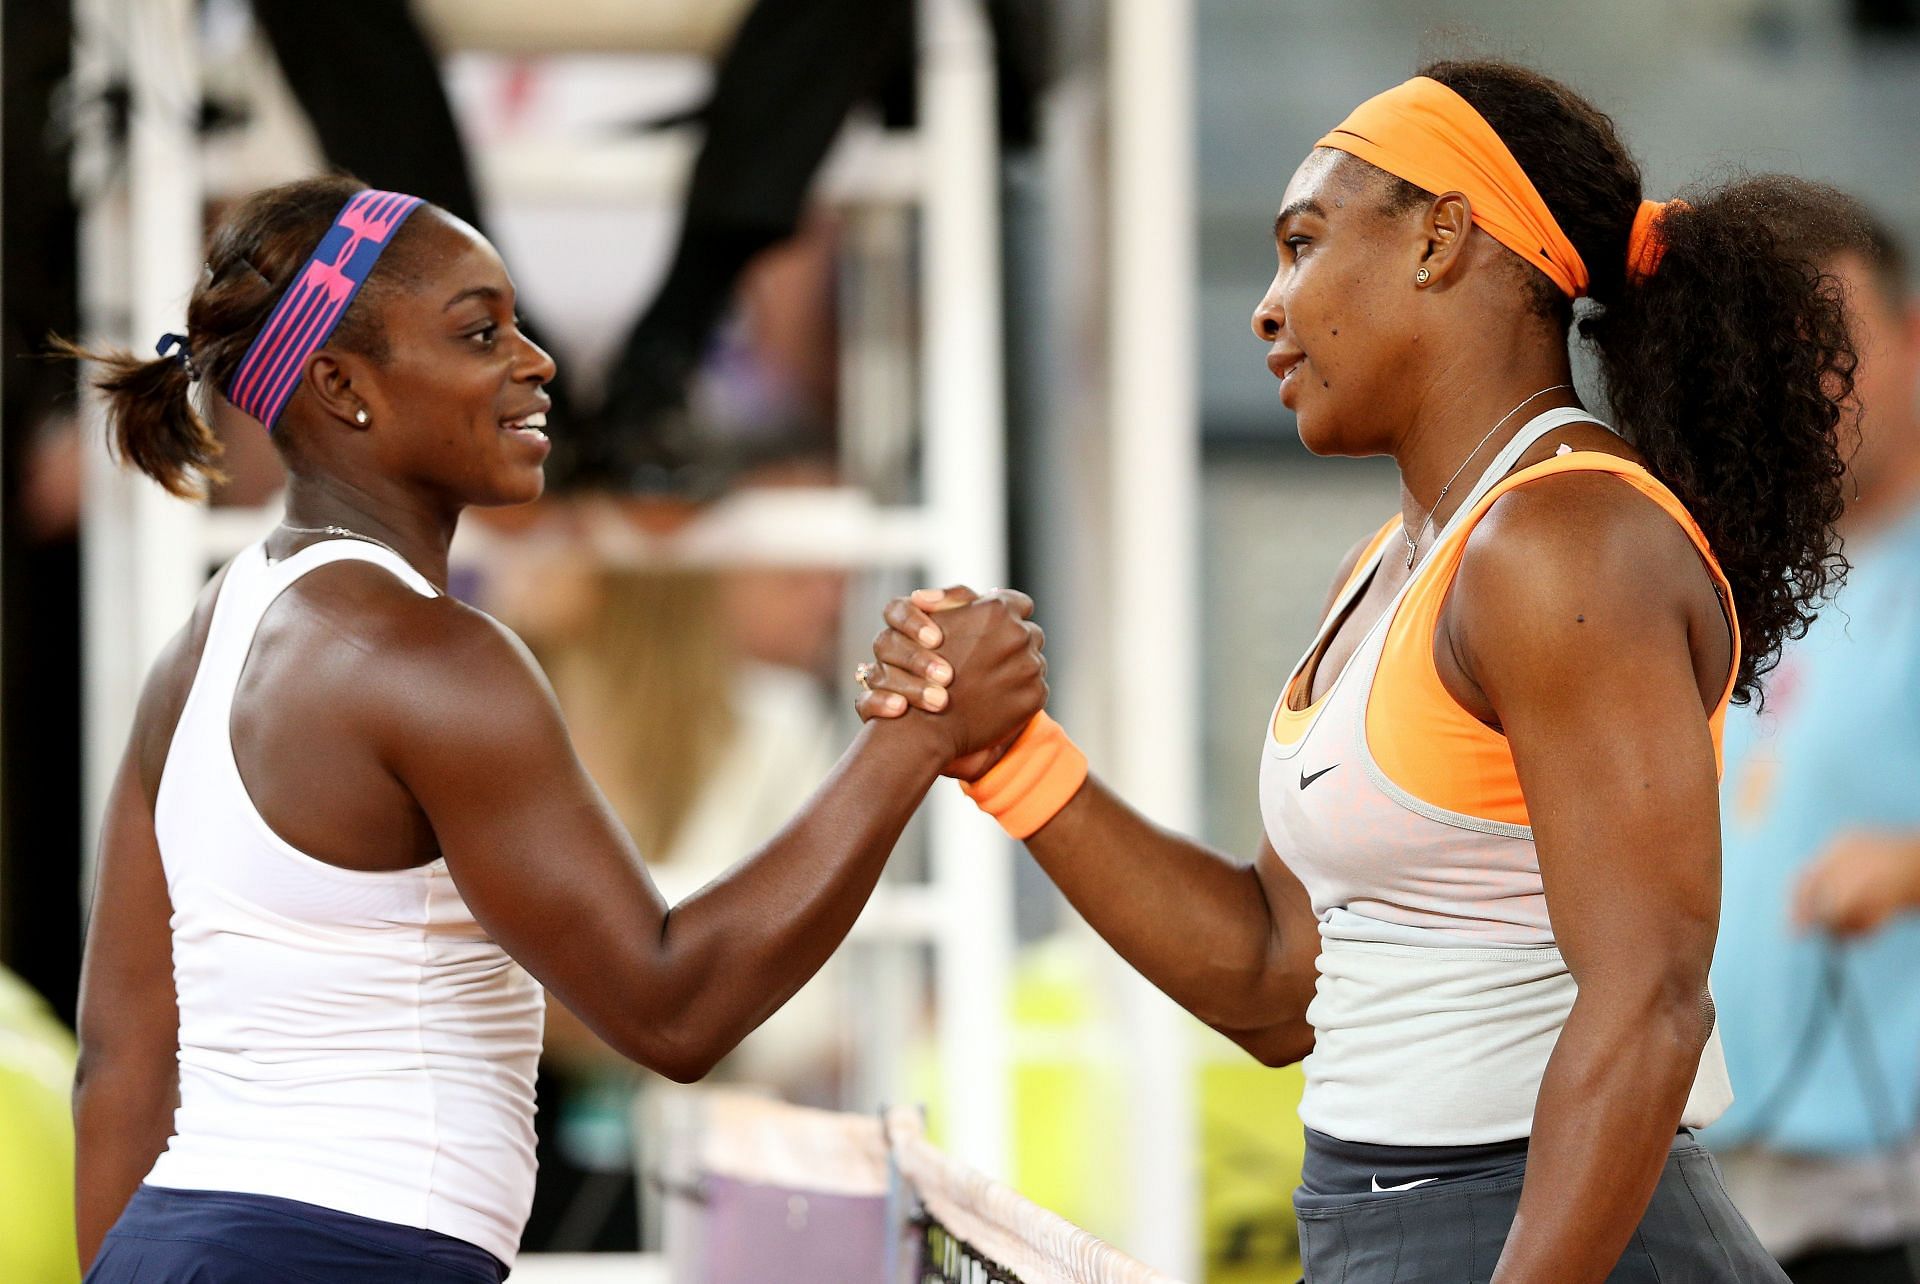 Sloane Stephens and Serena Williams at the 2015 Madrid Open.